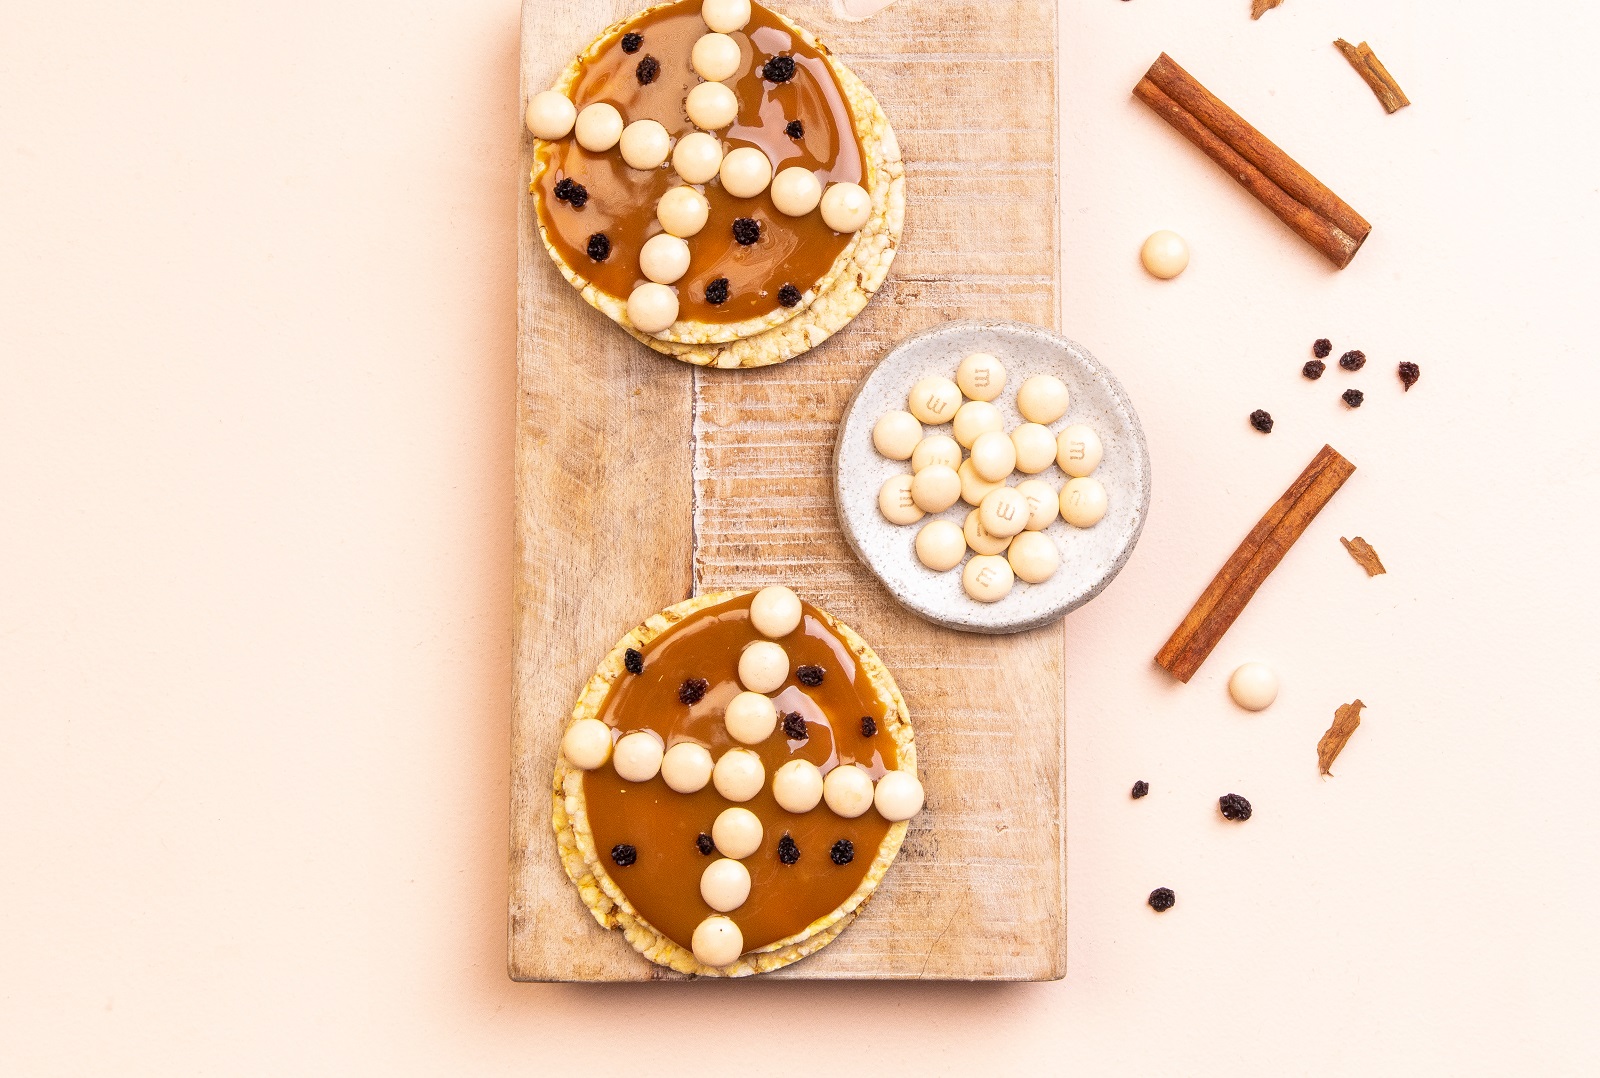 Hot Cross Bun version of Corn Thins. Caramel spread, white M&Ms + currants on Corn Thins slices